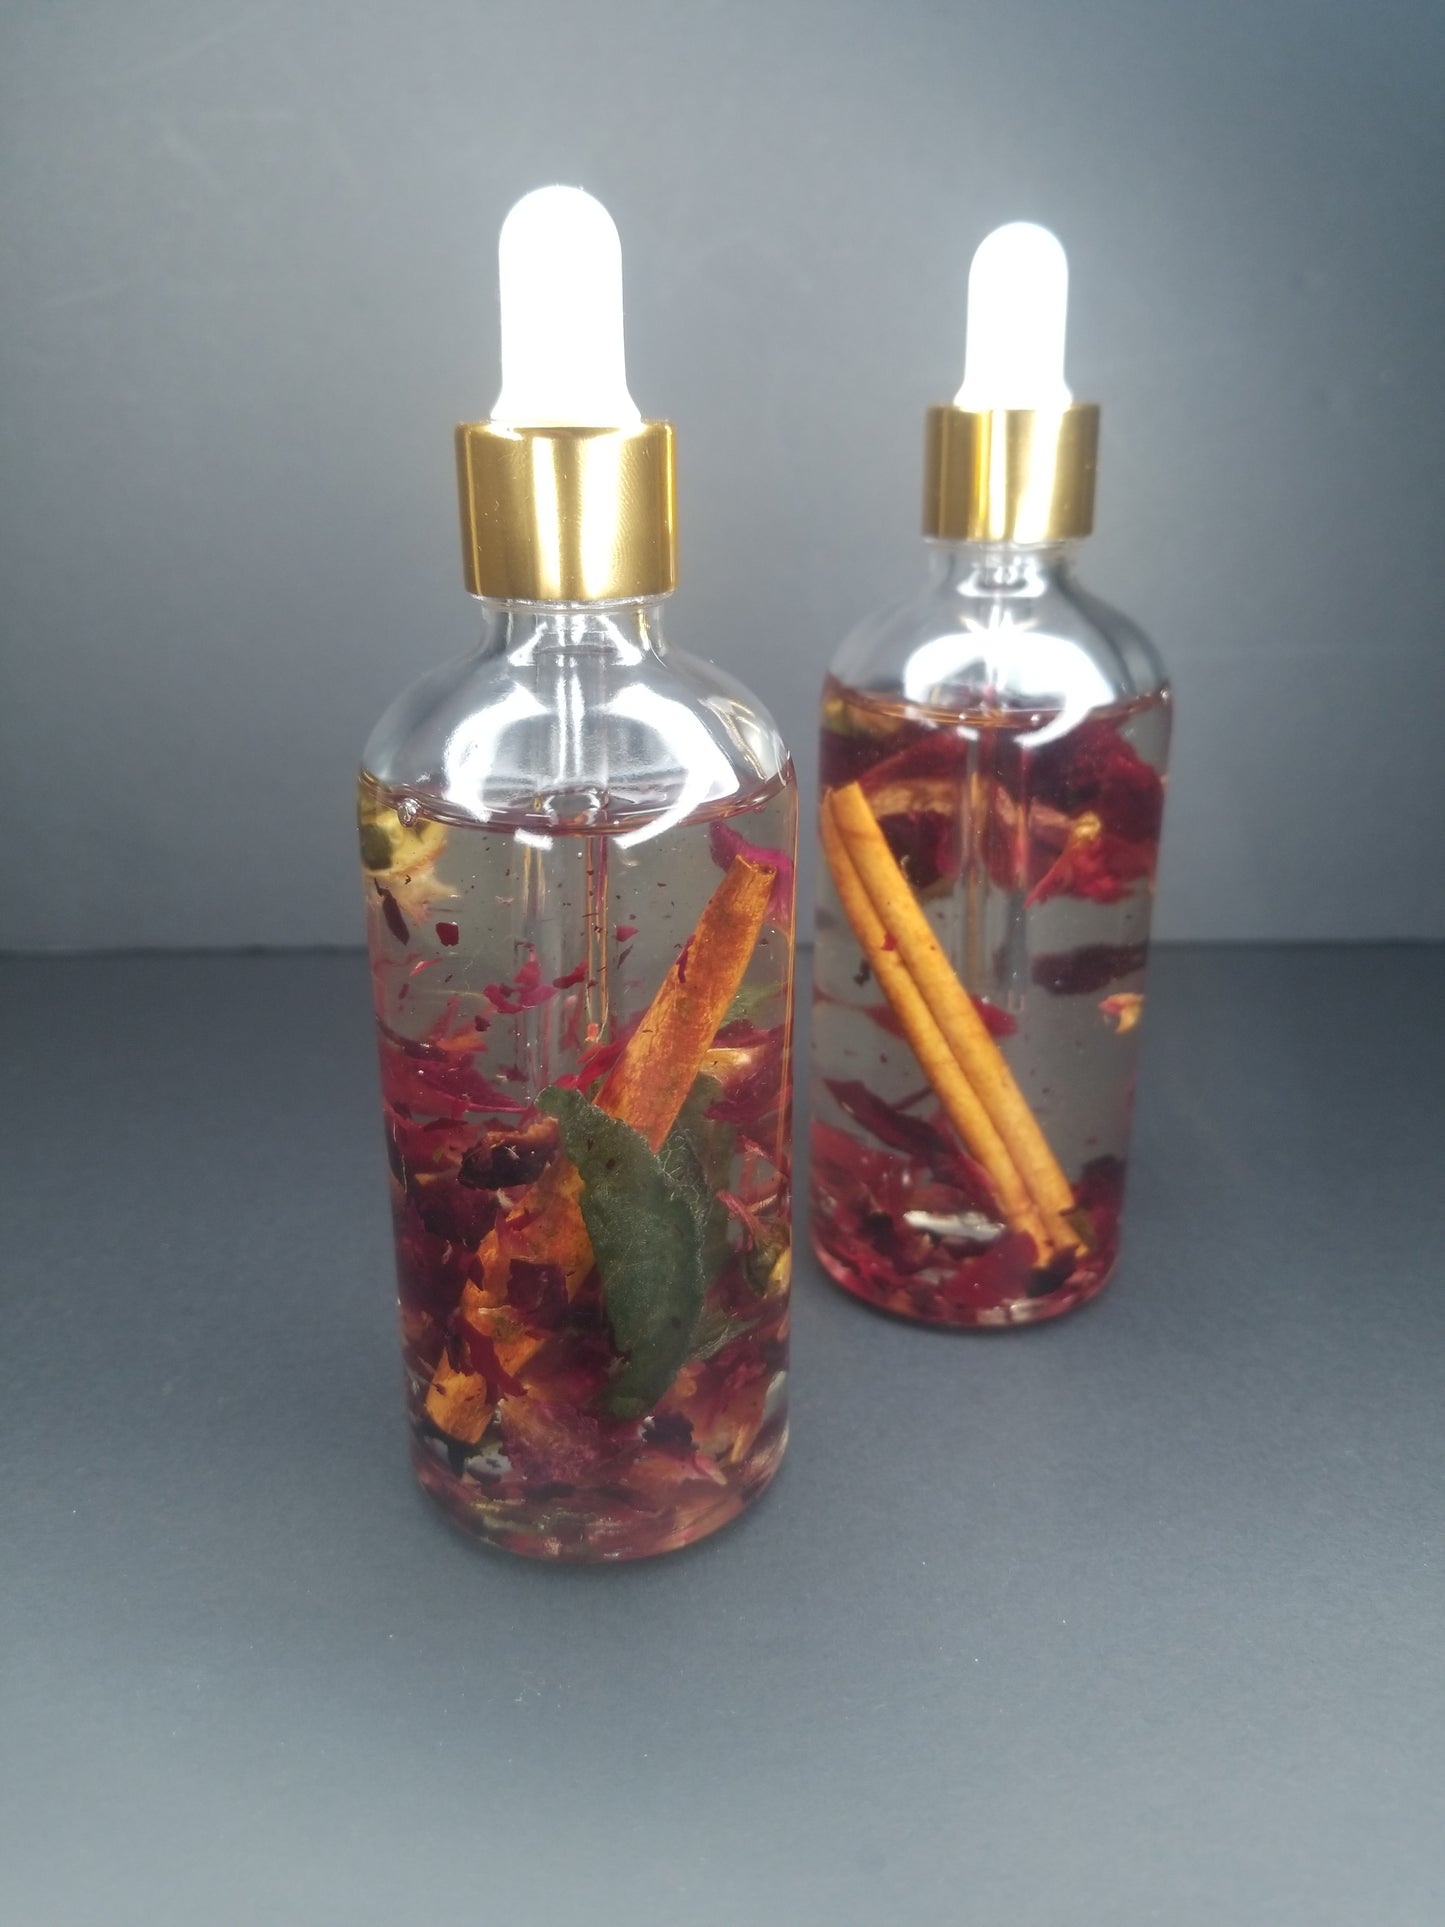 All-Natural Rose-Infused Body Collection